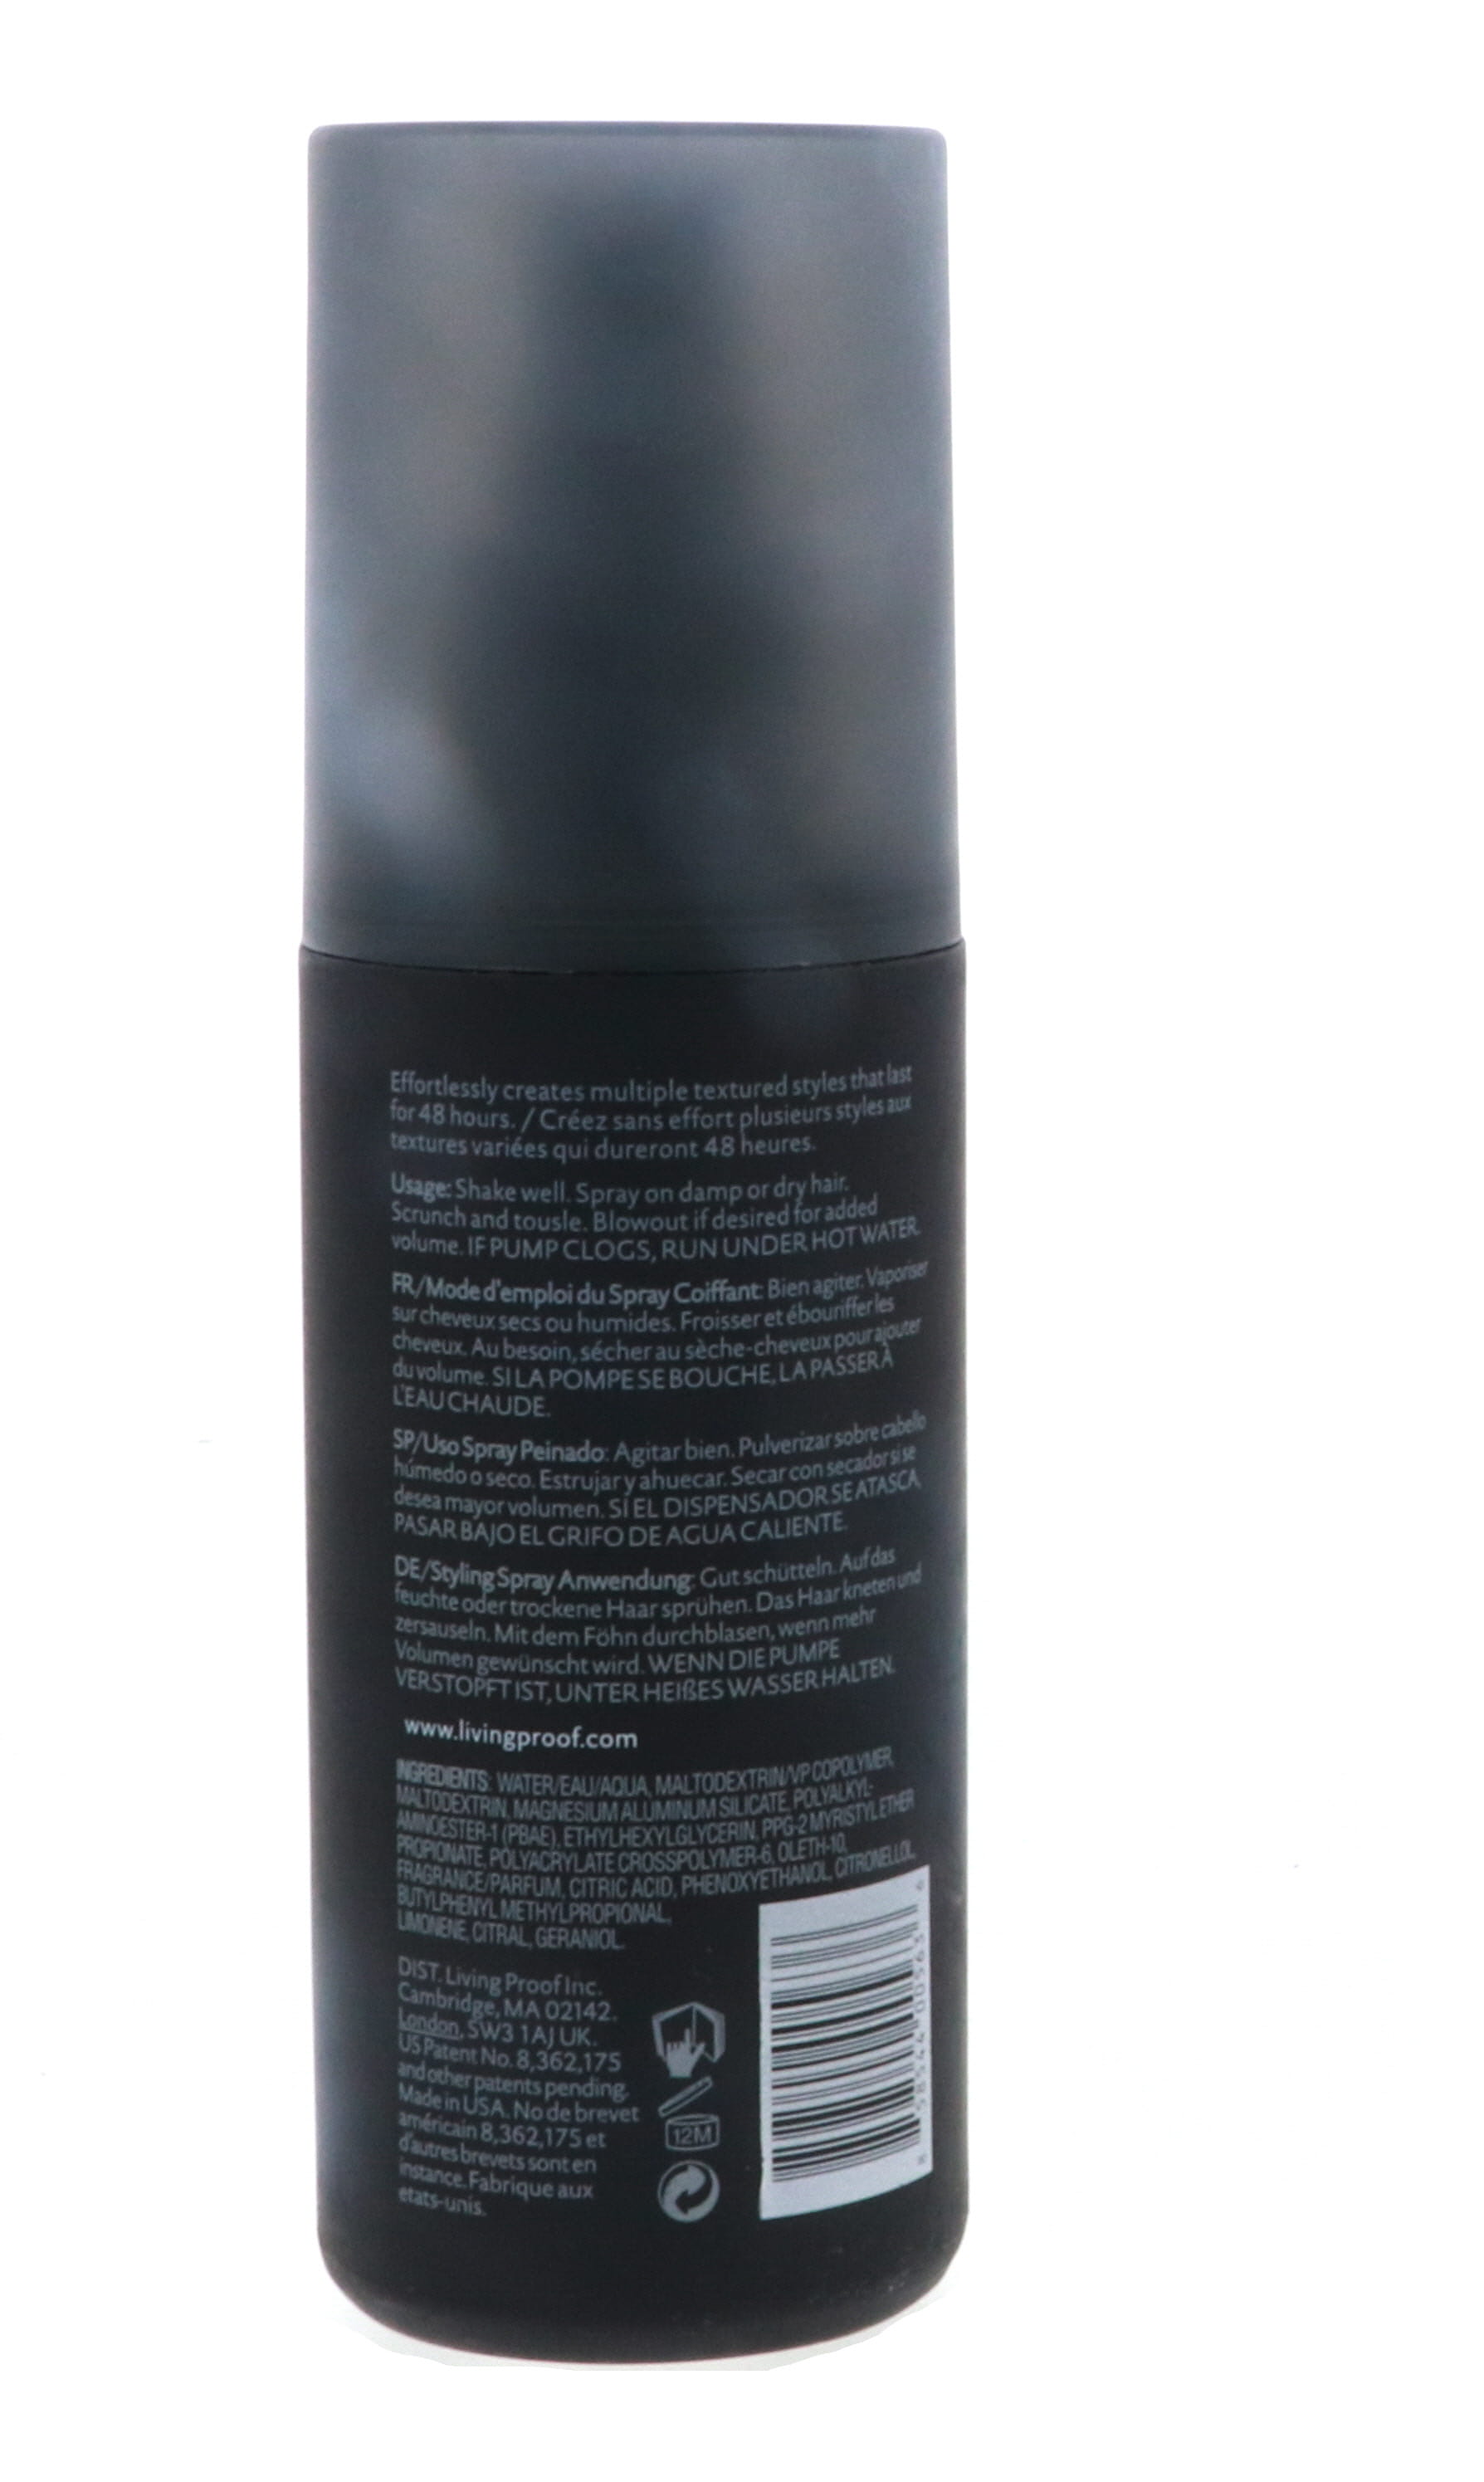 living proof, style lab instant texture mist, for multiple texturized styles use on damp or dry hair 5 oz - image 3 of 3